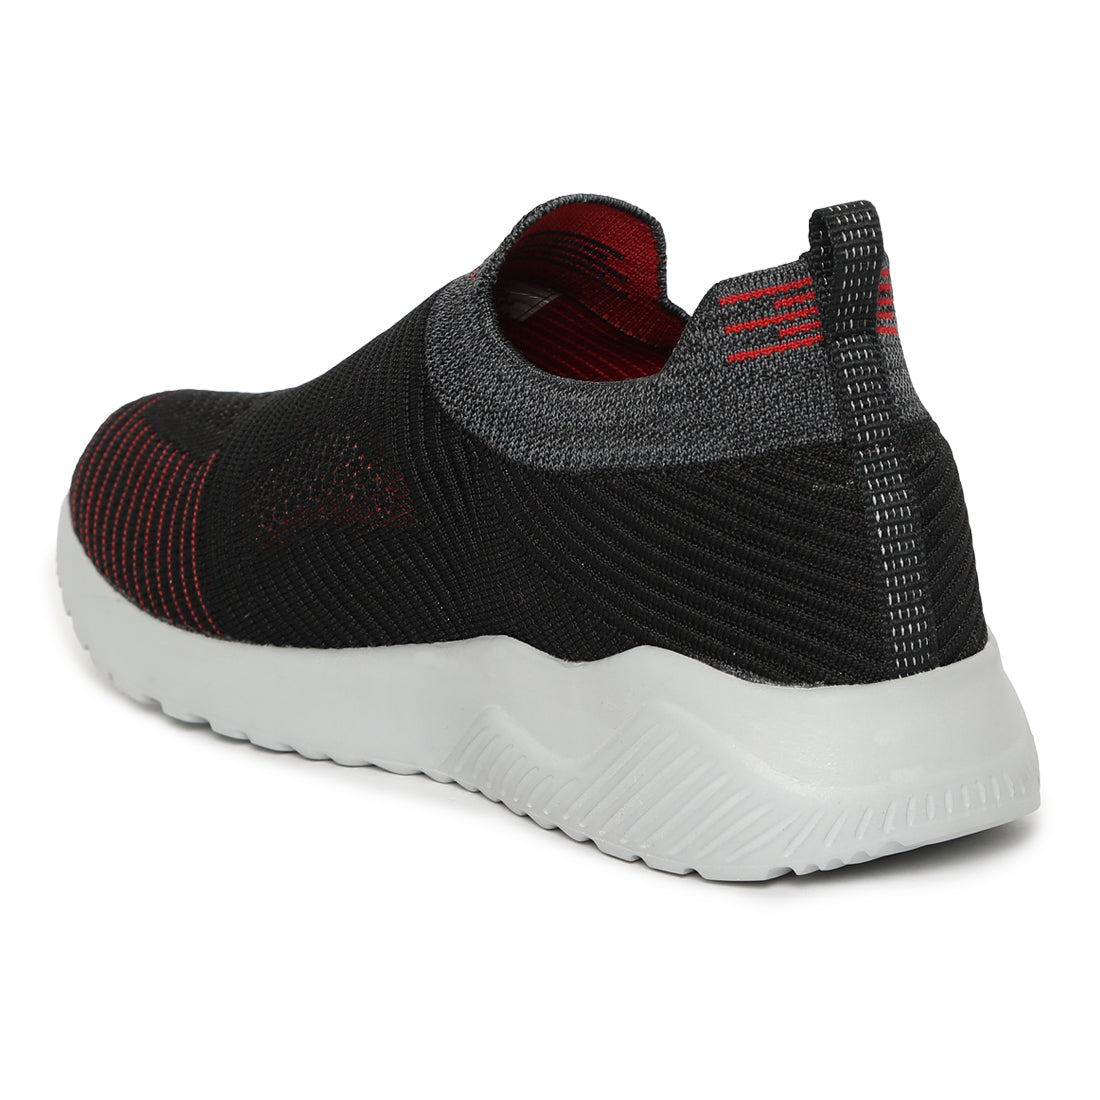 Eeken ESHGIA108 Black And Red Athleisure Shoes For Men